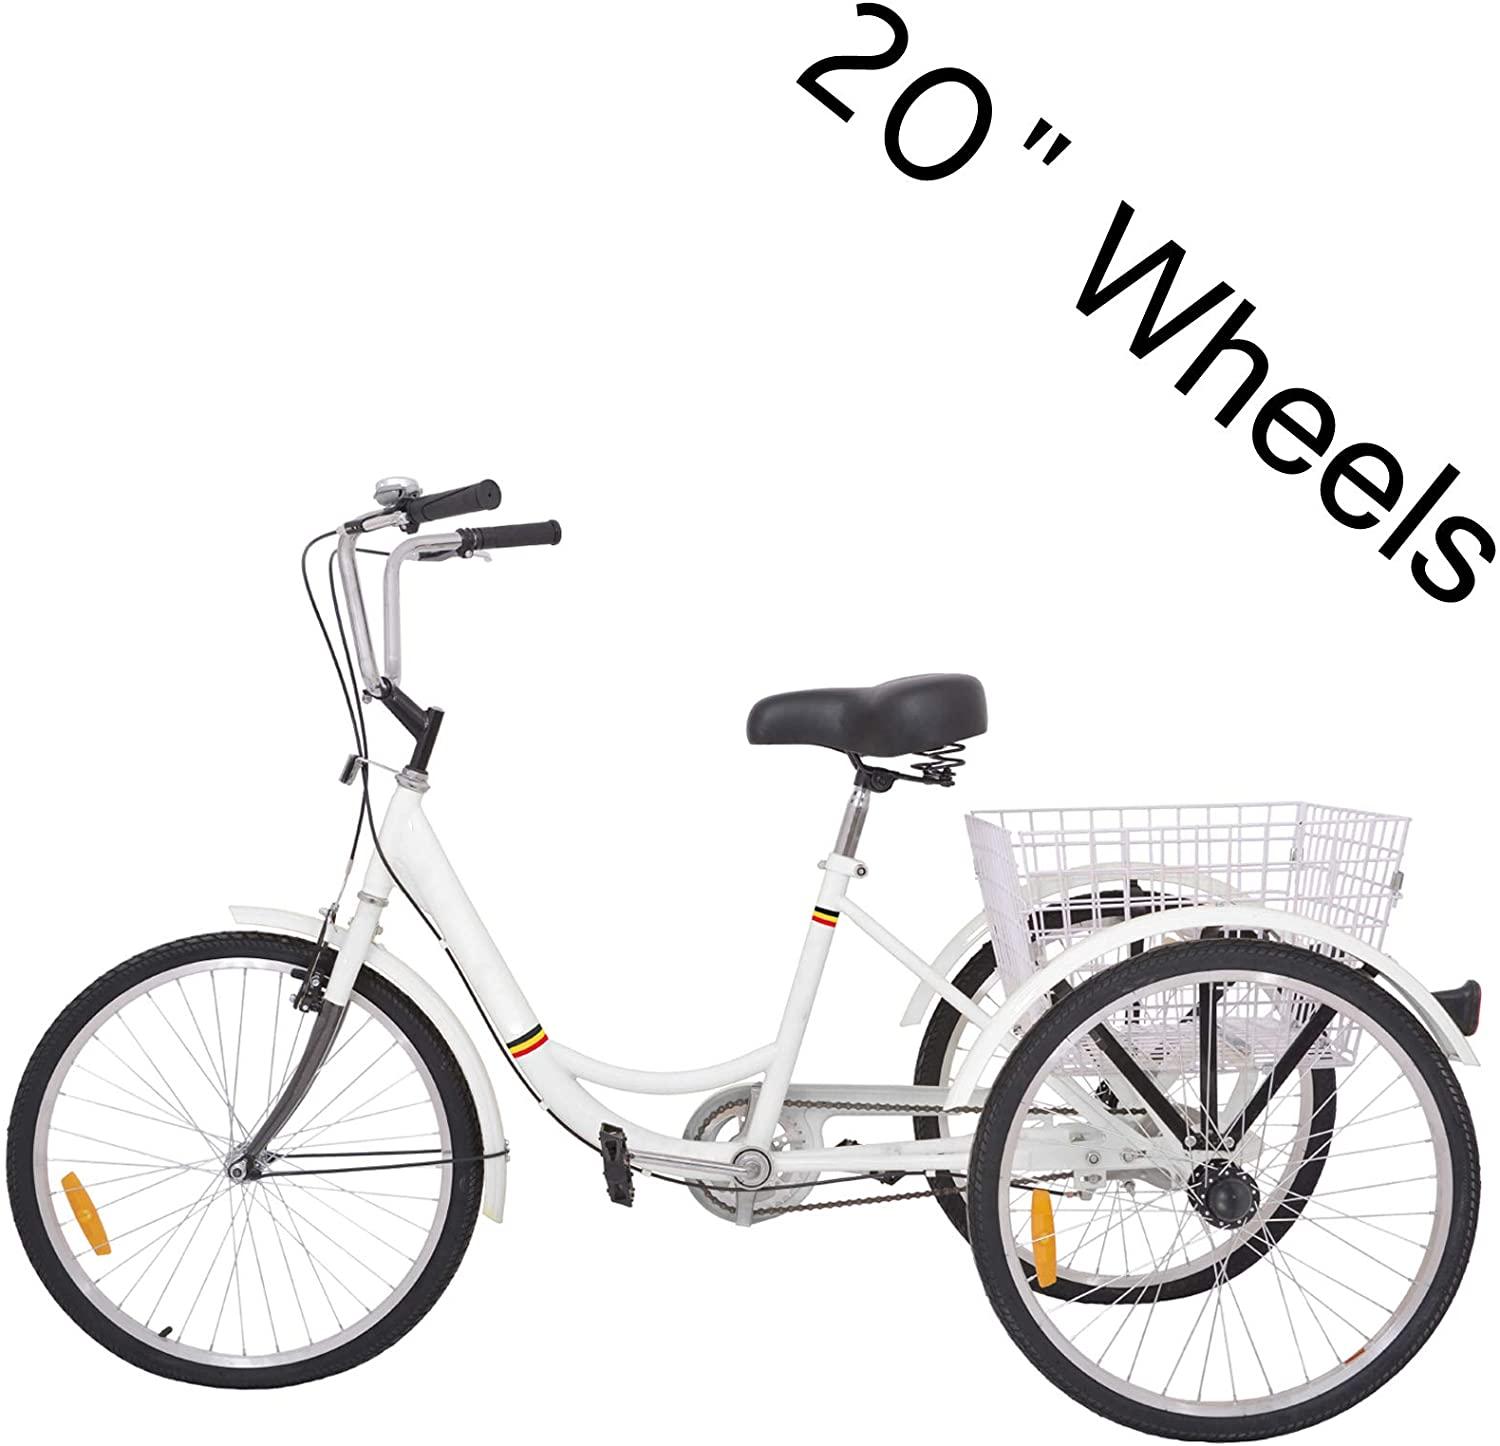 H&ZT Adult Tricycle Trike 7 Speed 3 Wheel Bike with Large Basket and Maintenance Tools Mens Womens Cruiser Bike 